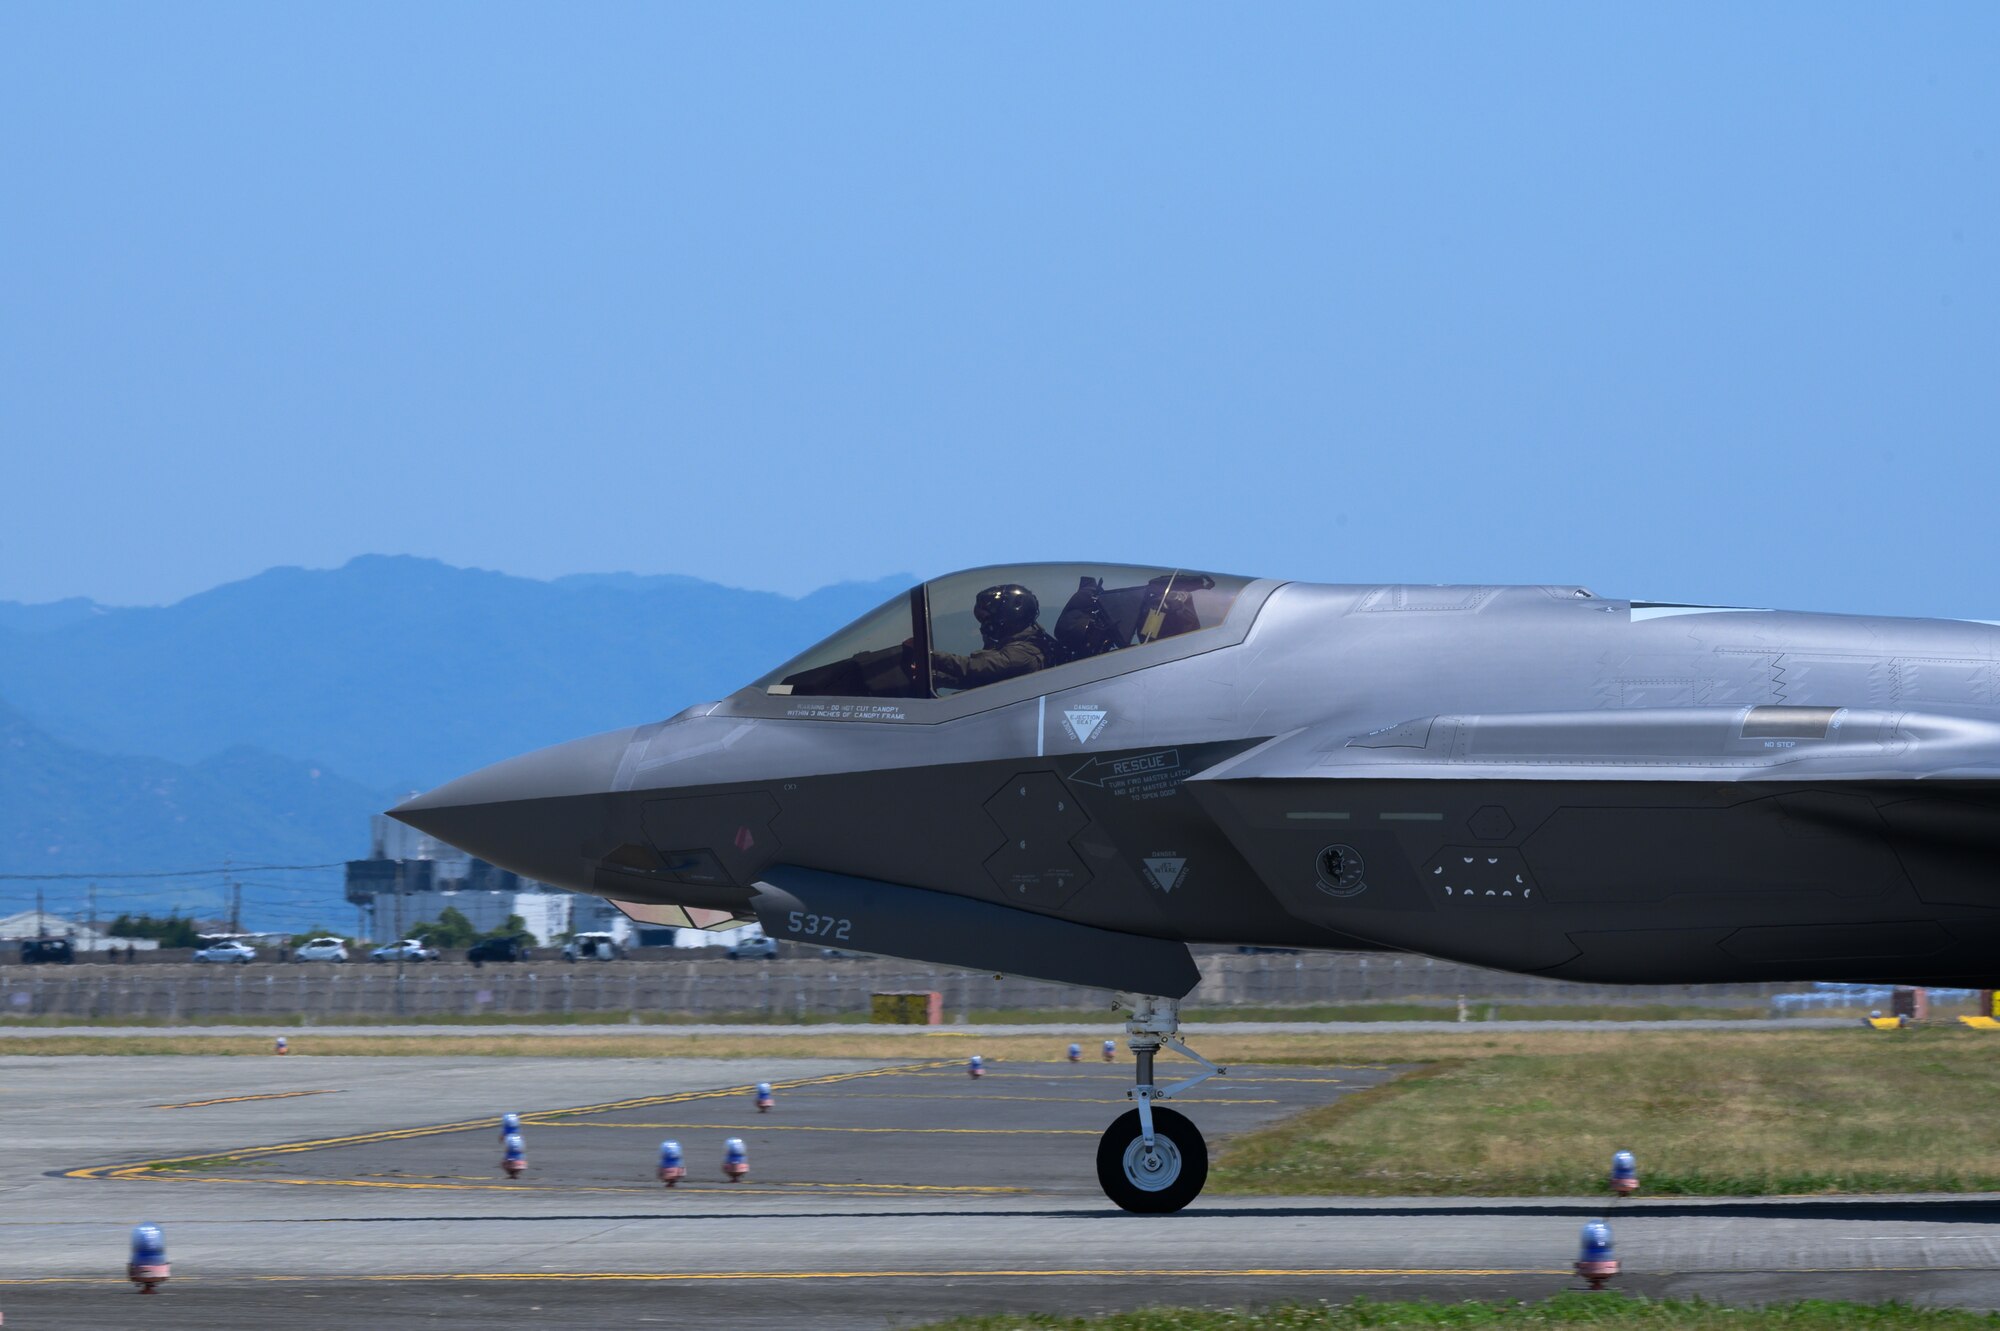 A U.S. Air Force F-35A Lightning II assigned to the 356th Expeditionary Fighter Squadron, 354th Air Expeditionary Wing taxis on the runway upon arrival at Marine Corps Air Station Iwakuni, Japan, for Agile Combat Employment training, June 4, 2022. Initiatives like ACE underscore the investment, interoperability and access required to strengthen force posture. (U.S. Air Force photo by Senior Airman Jose Miguel T. Tamondong)